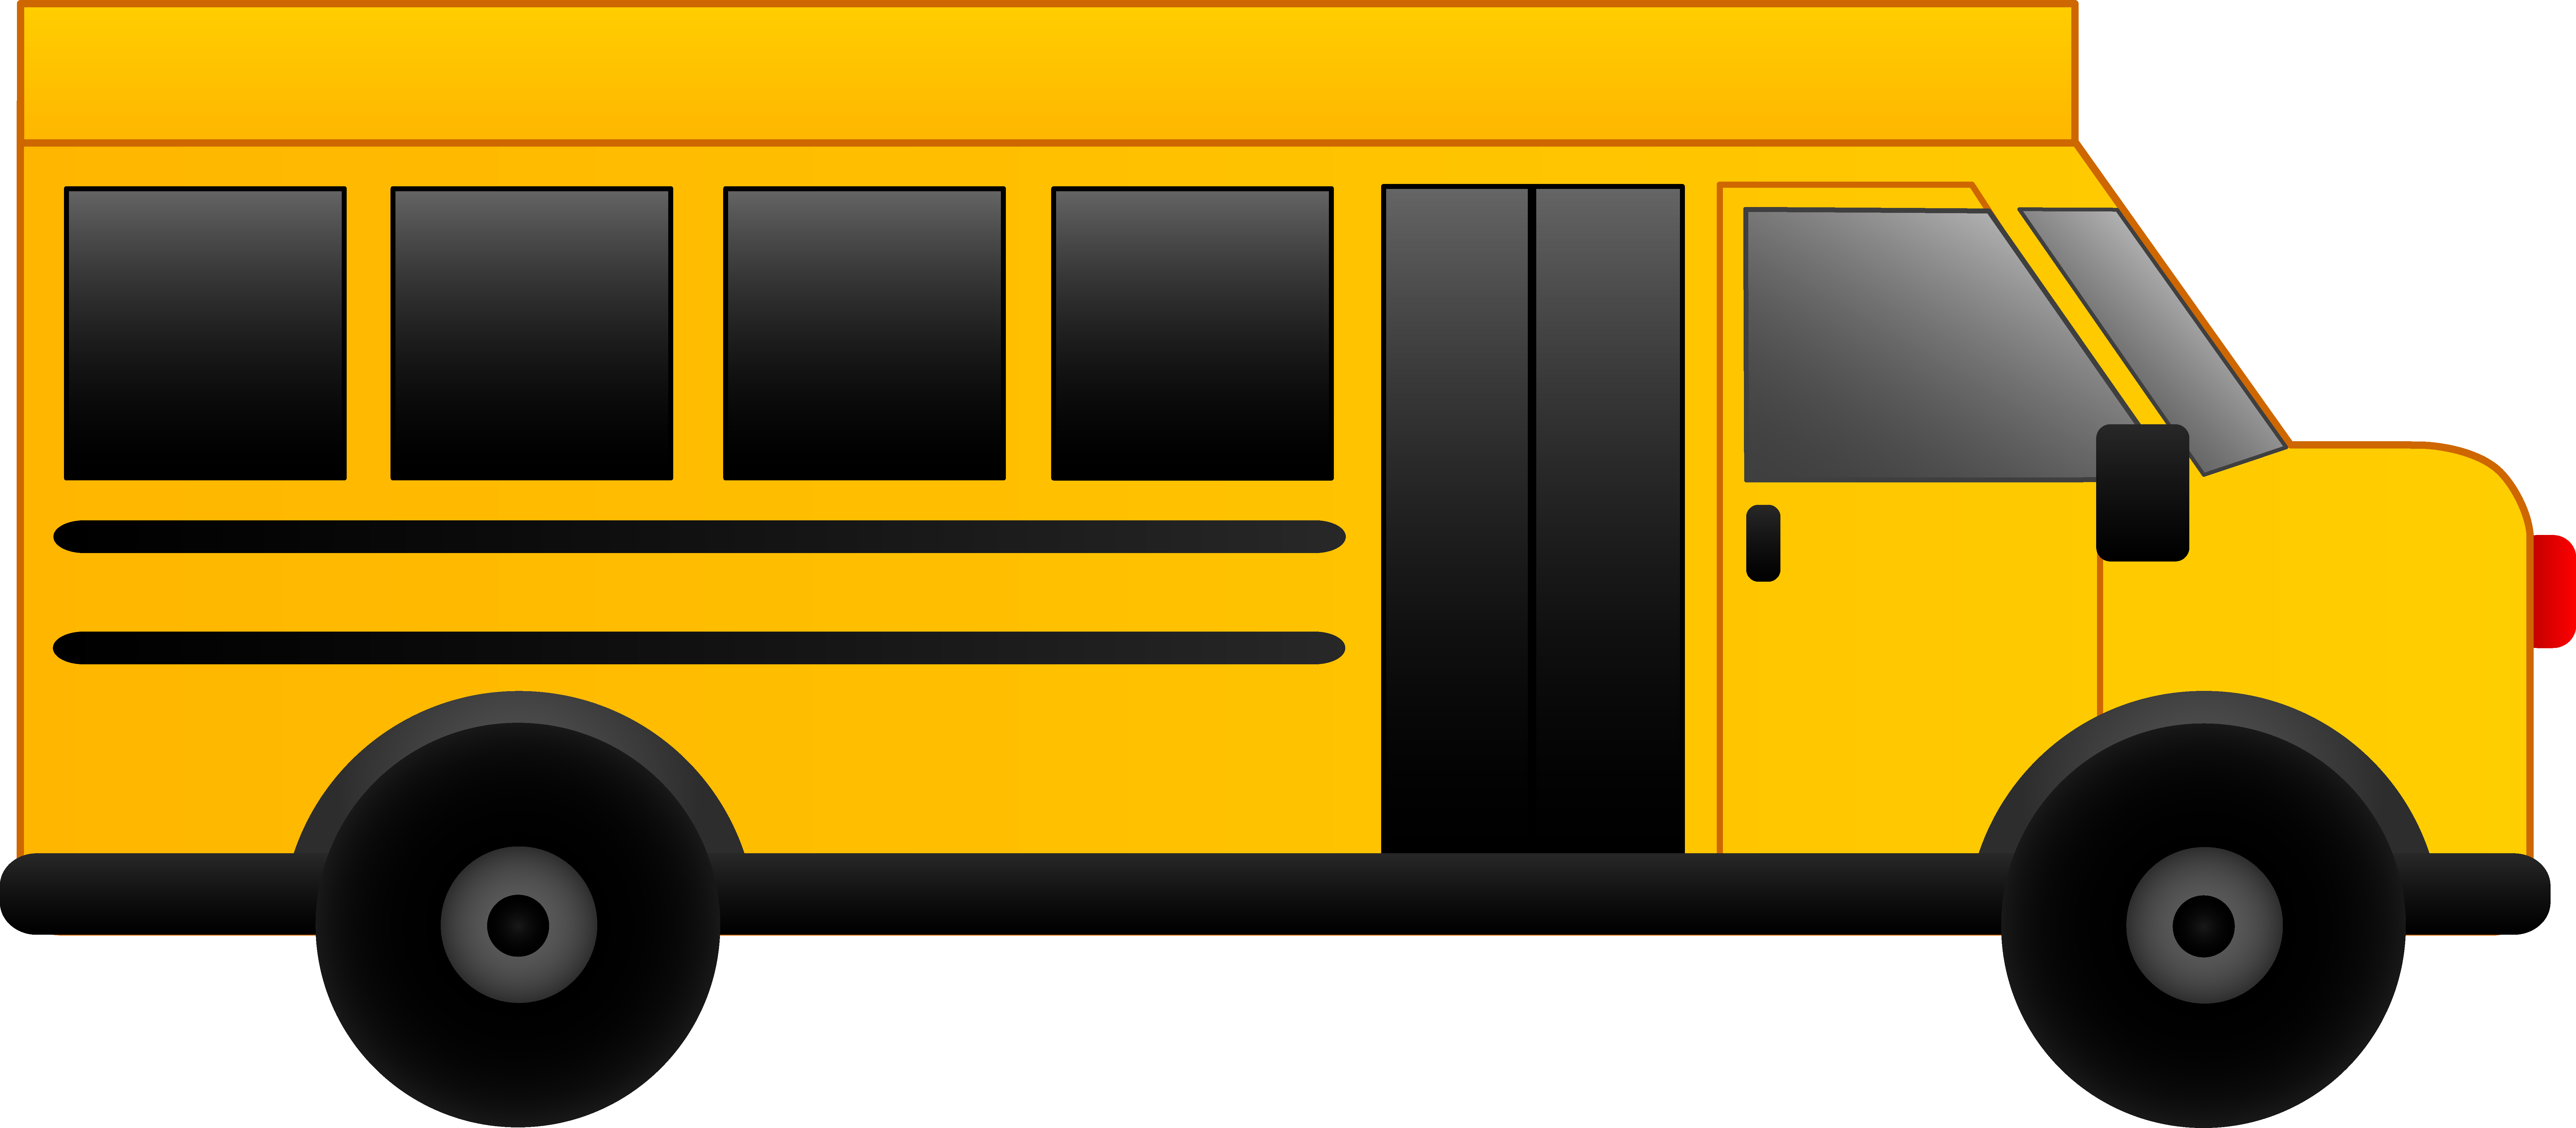 Free Cartoon Picture Of A Bus, Download Free Cartoon Picture Of A Bus